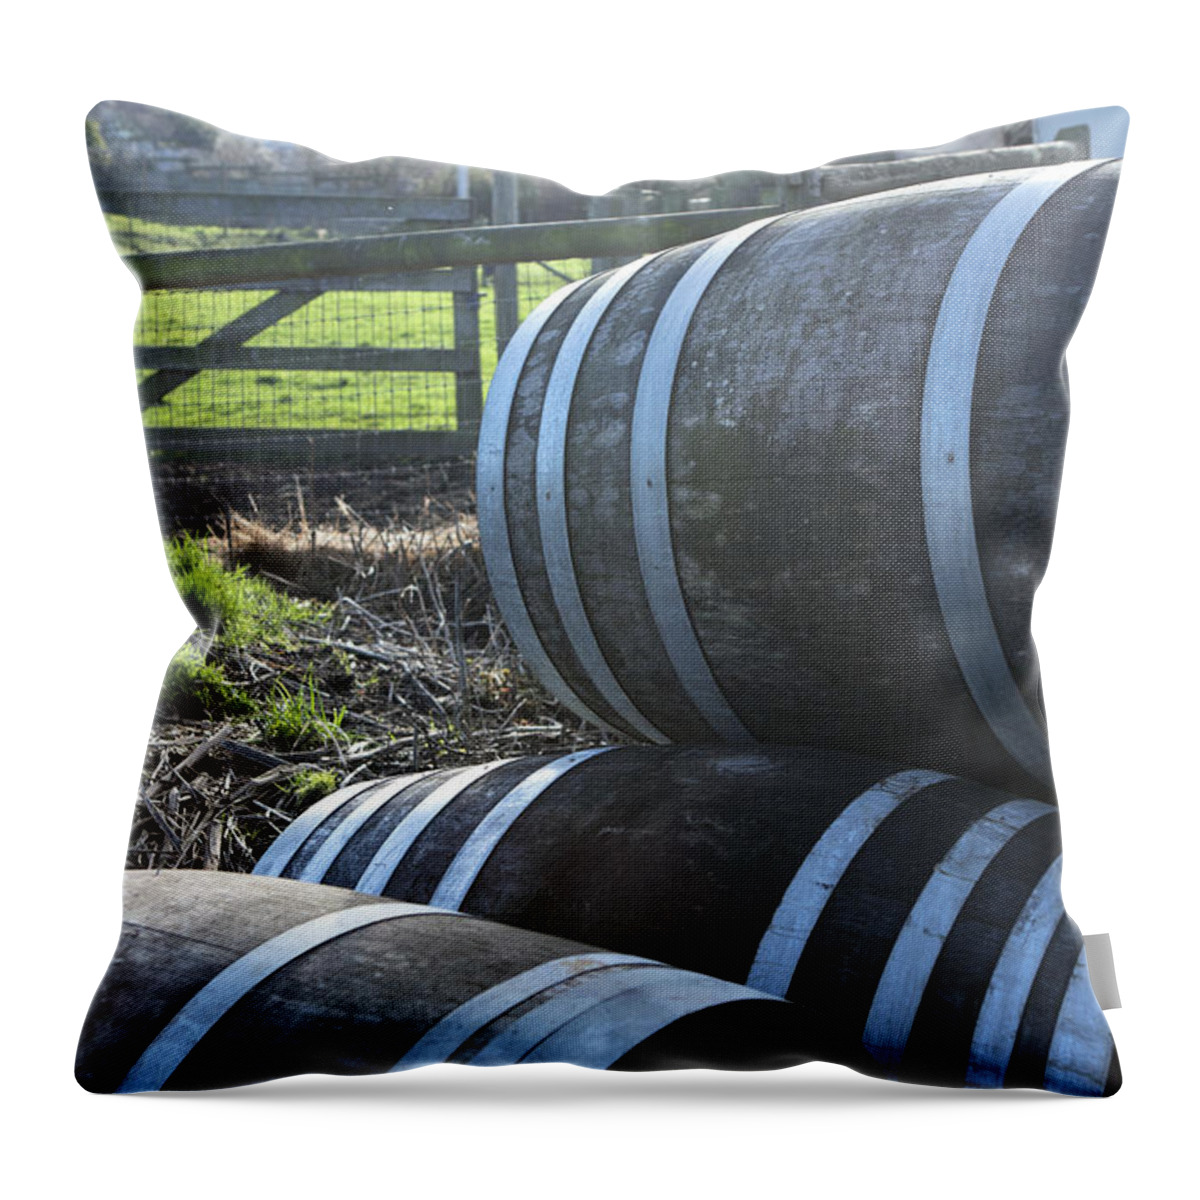 Grass Throw Pillow featuring the photograph Wine Barrels by Charity Burggraaf